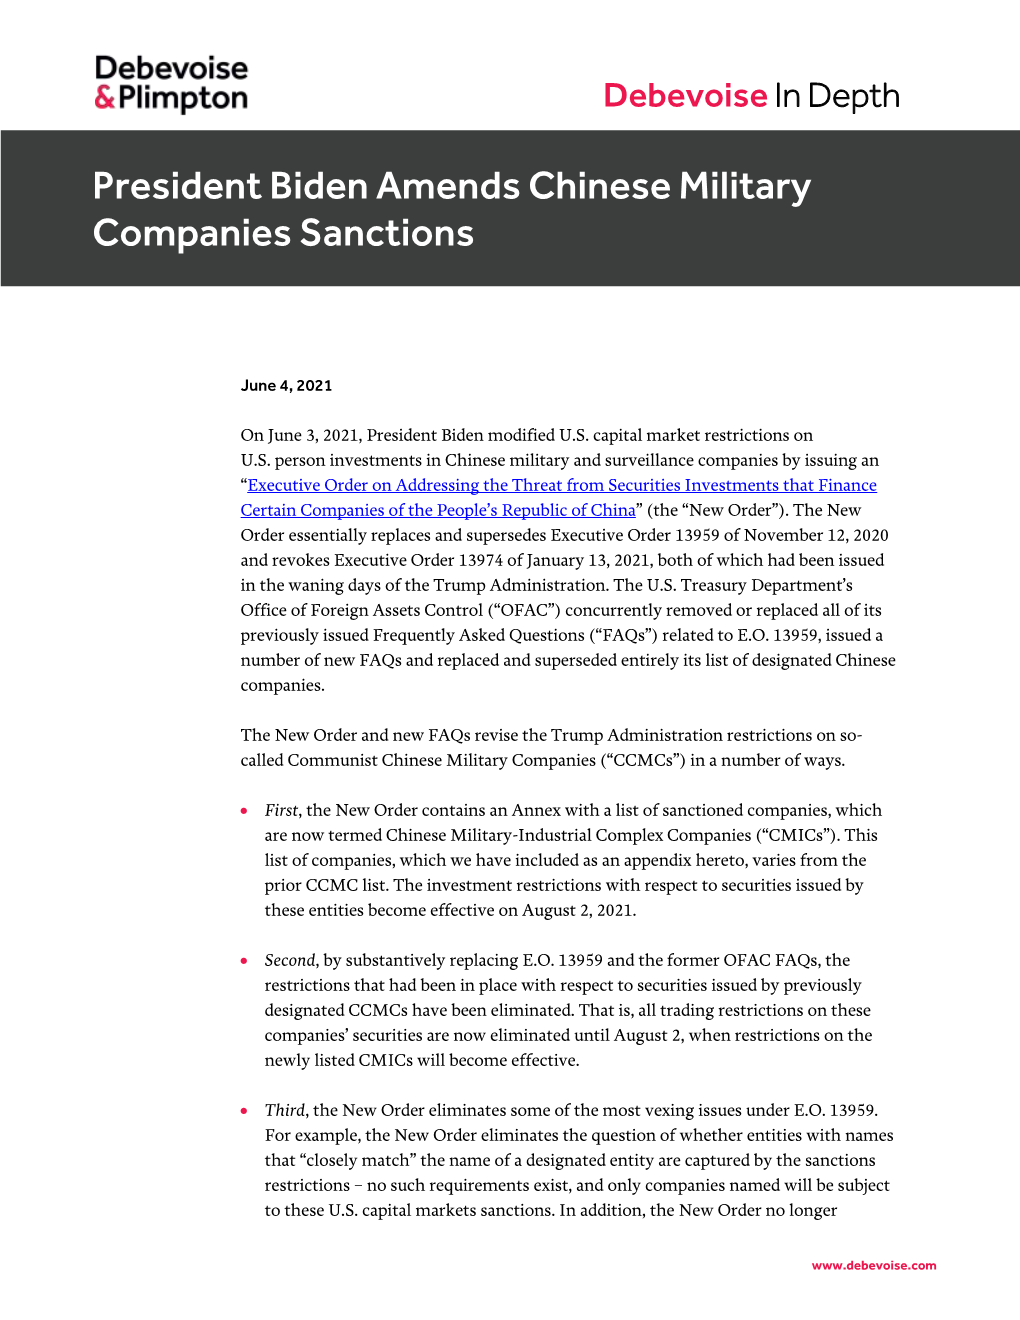 President Biden Amends Chinese Military Companies Sanctions